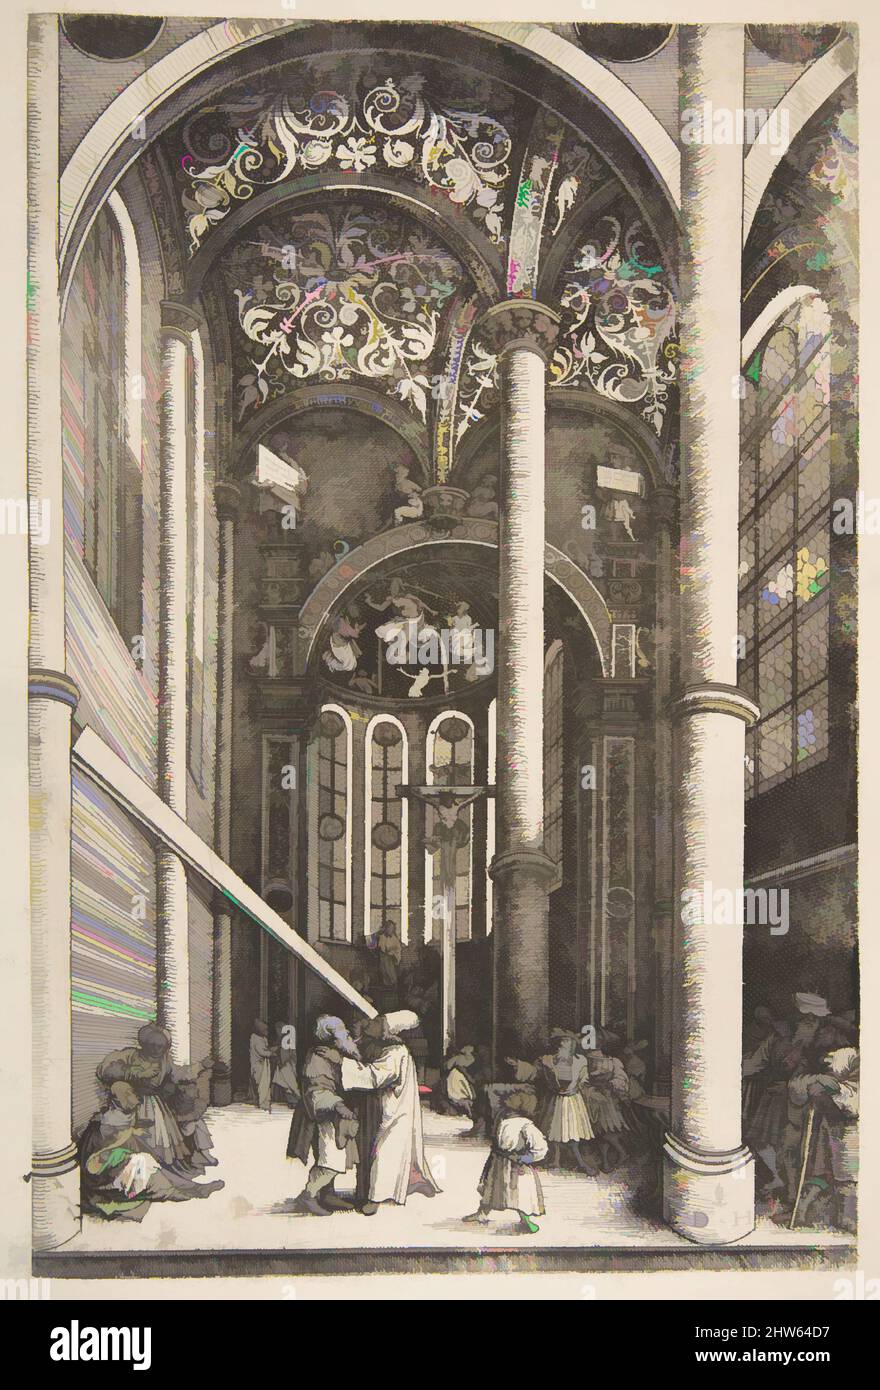 Art inspired by Interior of the Church of Saint Katherine’s with the Parable of the Mote and the Beam, ca. 1530, Etching; first state of two, plate: 11 5/8 x 7 11/16 in. (29.5 x 19.6 cm), Prints, Daniel Hopfer (German, Kaufbeuren 1471–1536 Augsburg, Classic works modernized by Artotop with a splash of modernity. Shapes, color and value, eye-catching visual impact on art. Emotions through freedom of artworks in a contemporary way. A timeless message pursuing a wildly creative new direction. Artists turning to the digital medium and creating the Artotop NFT Stock Photo